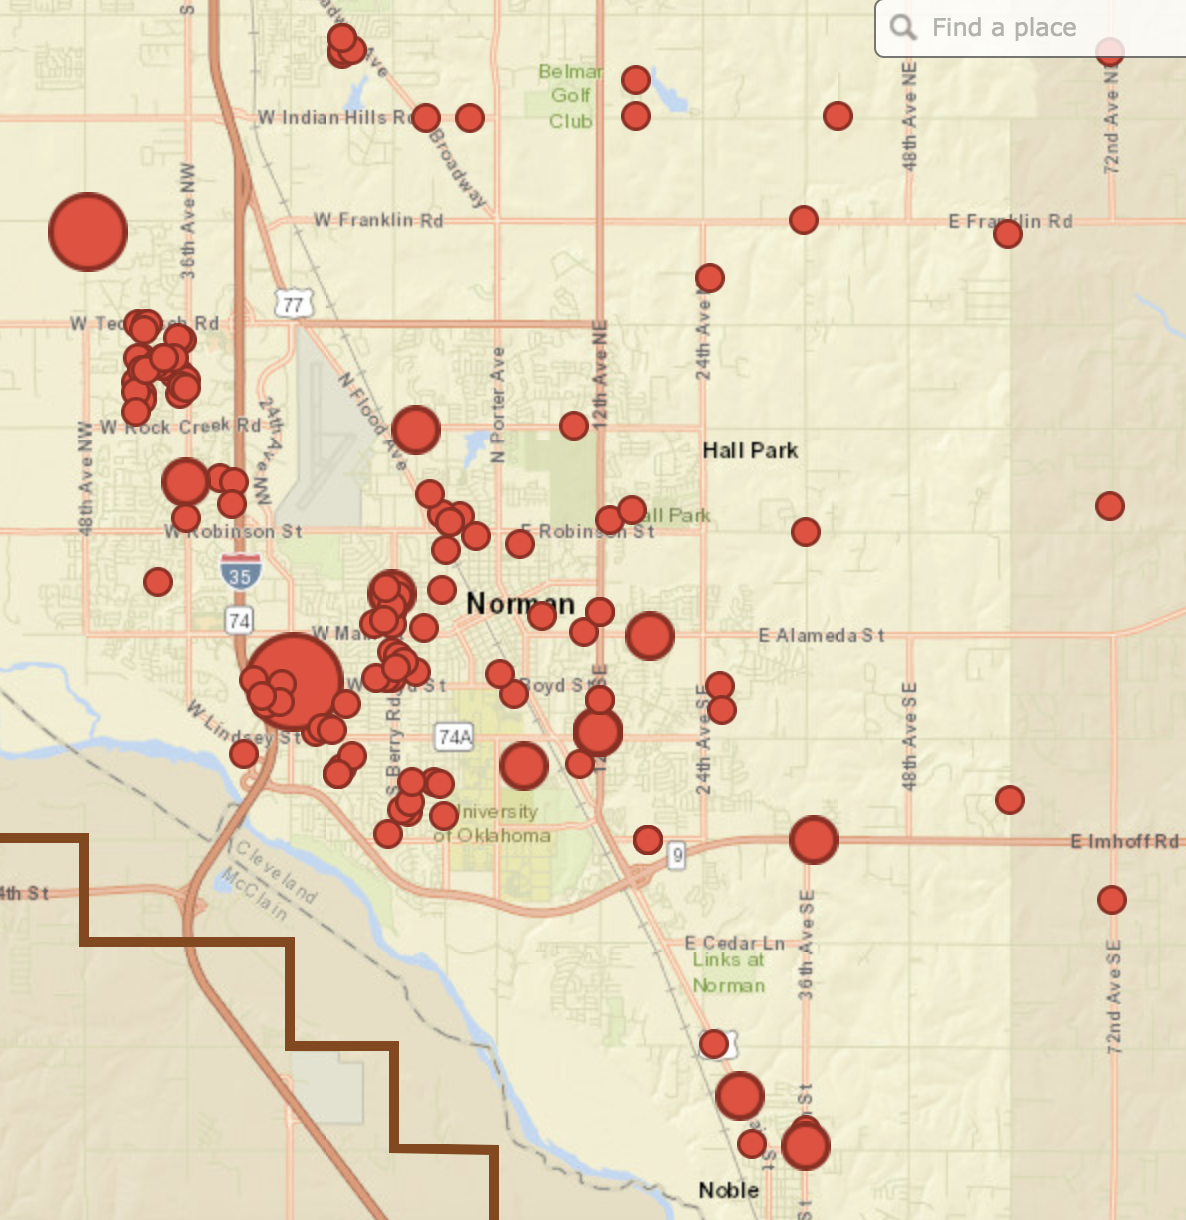 og e power outage map oklahoma city Thousands Without Power In Norman Area After Saturday Storms og e power outage map oklahoma city